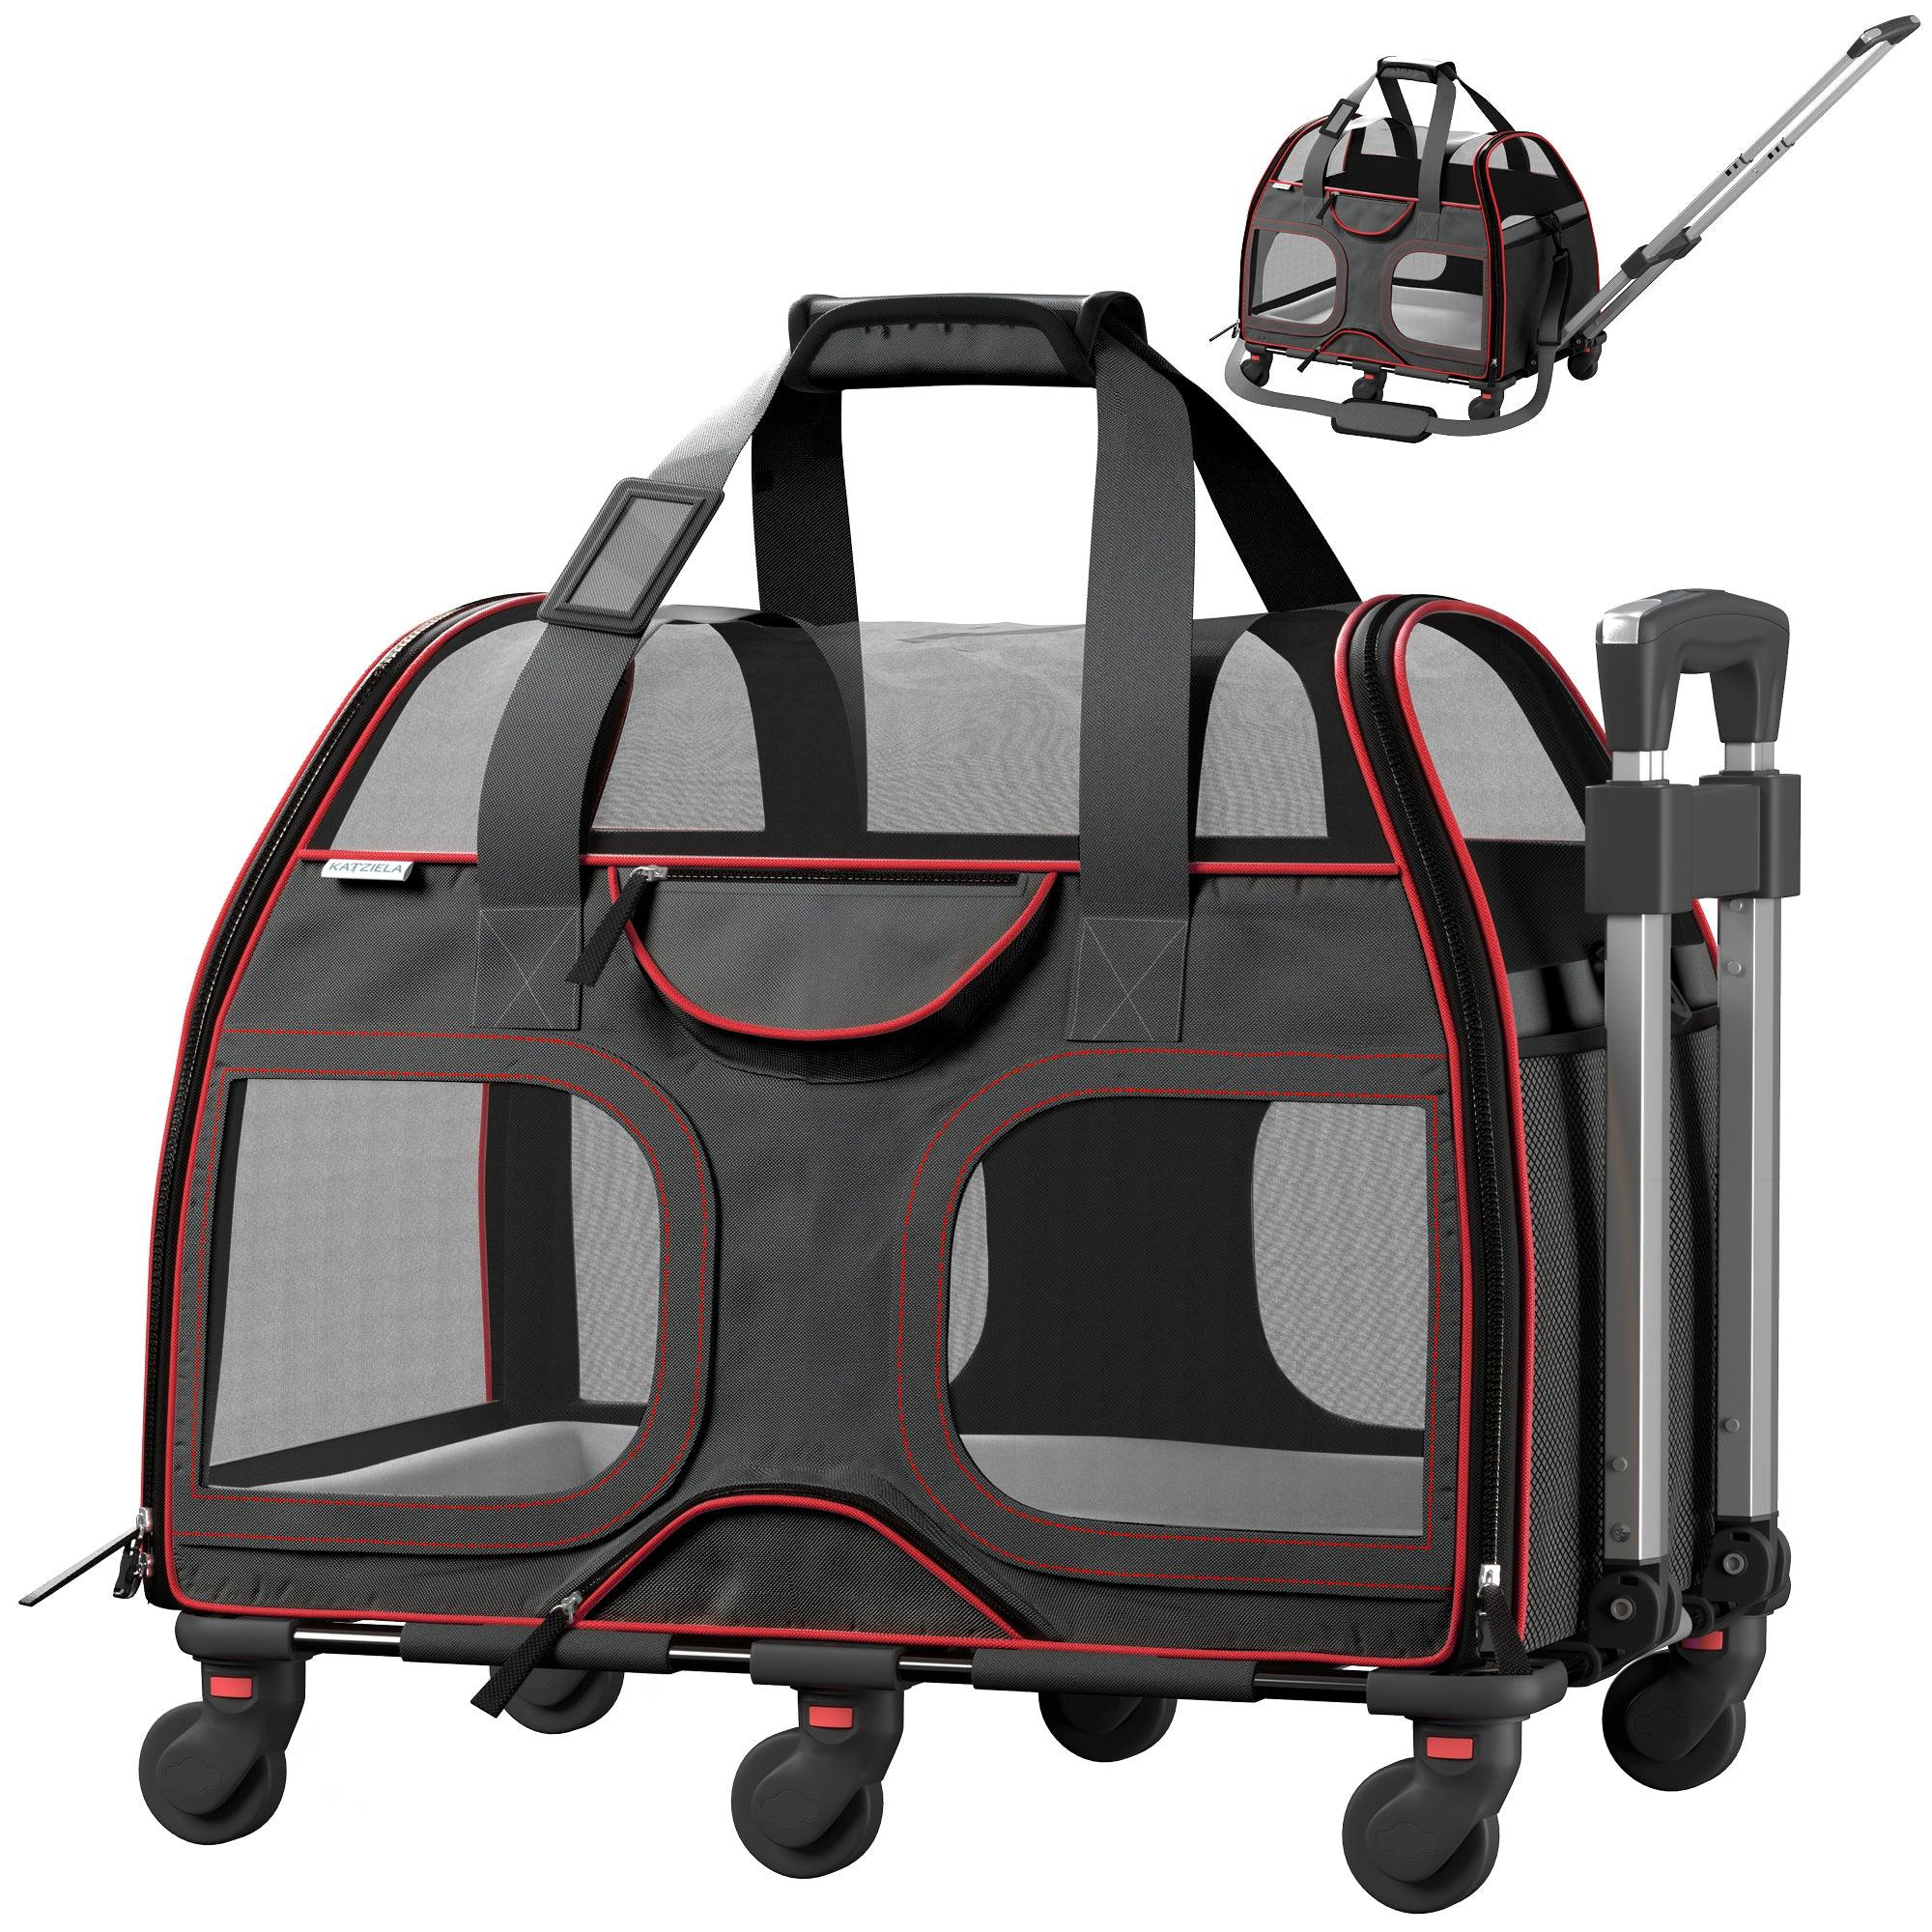 This Cat Carrier Is Travel Writer-approved